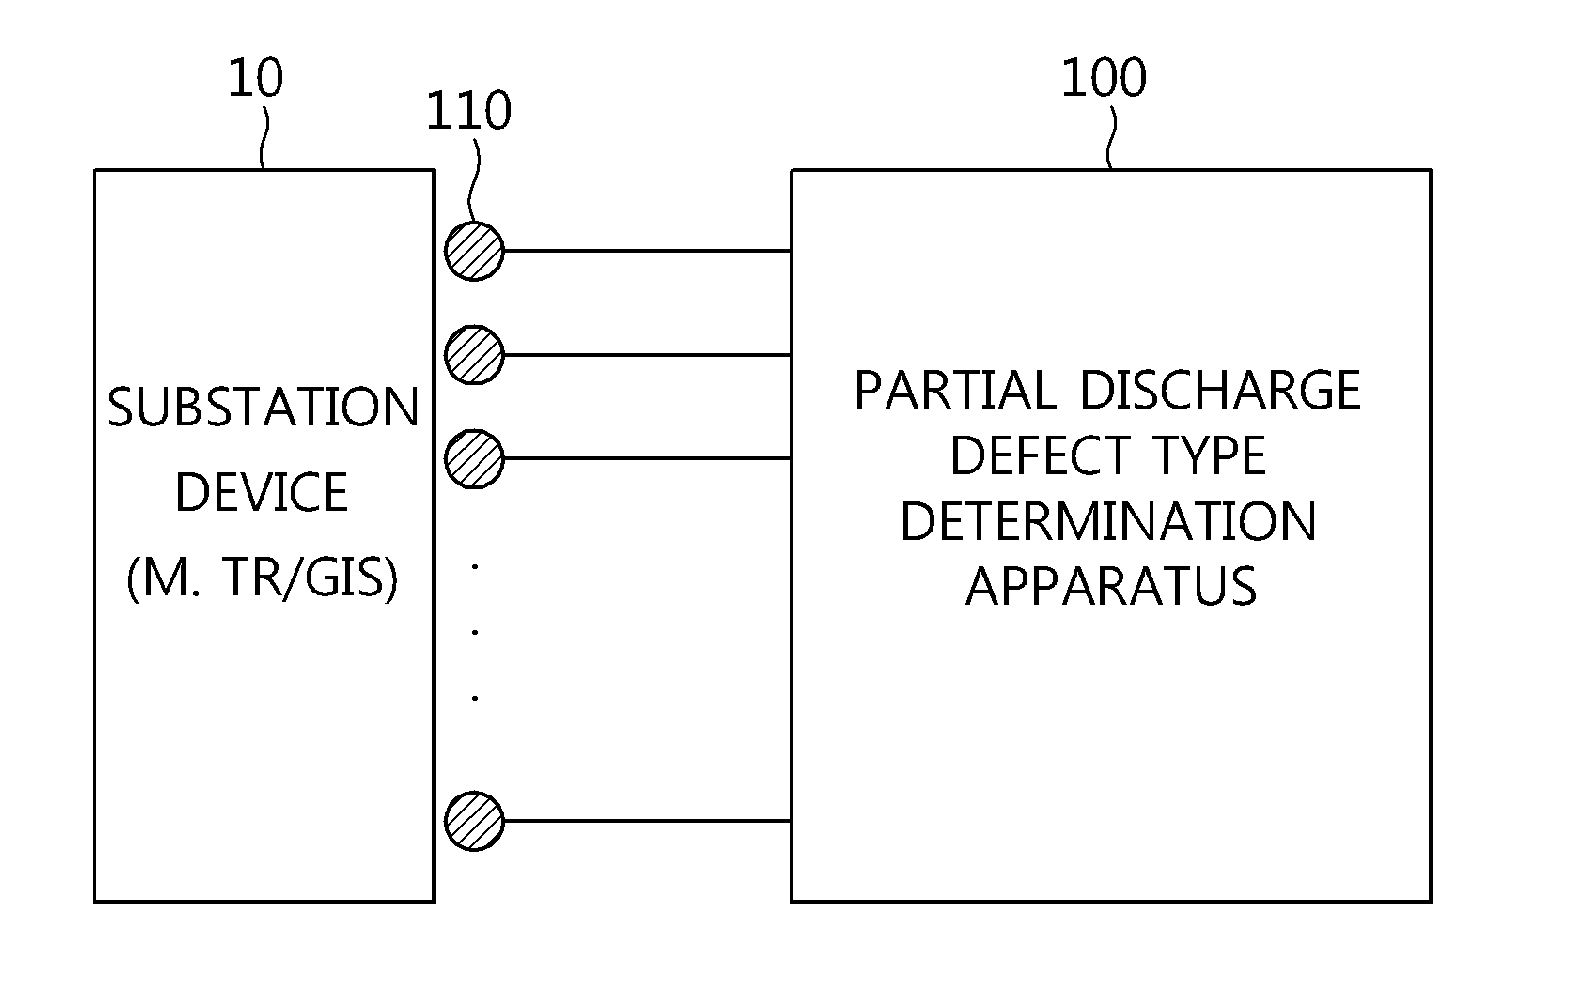 Method and device for determining the defect type of a partial discharge